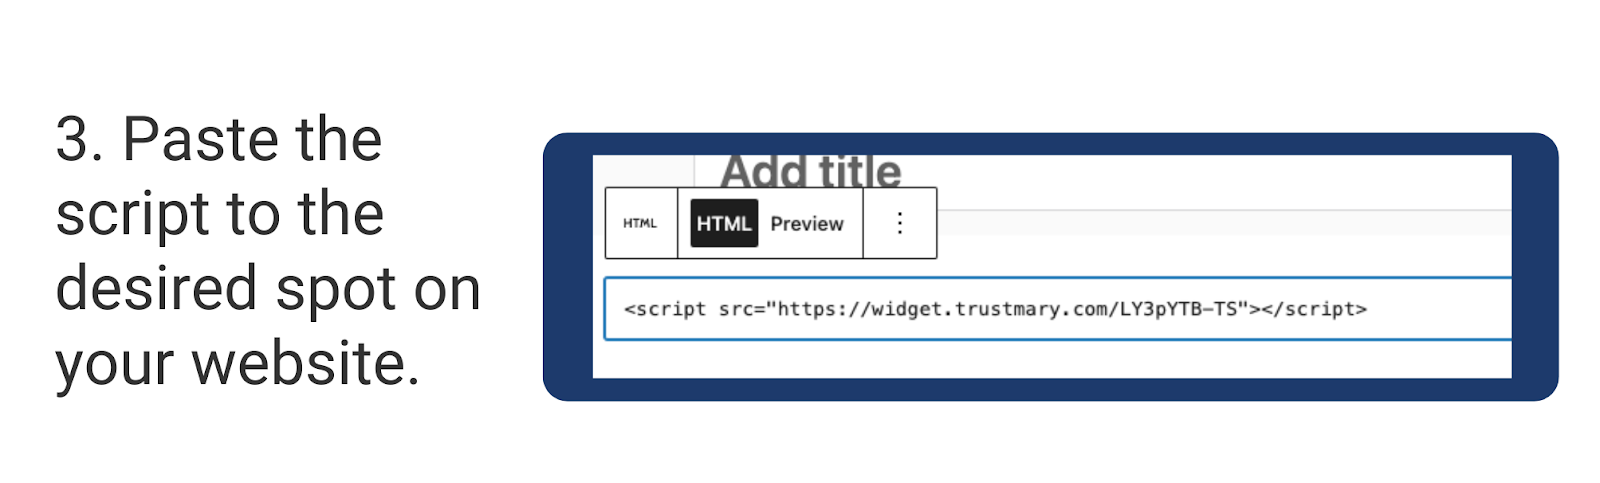 paste embed code to website